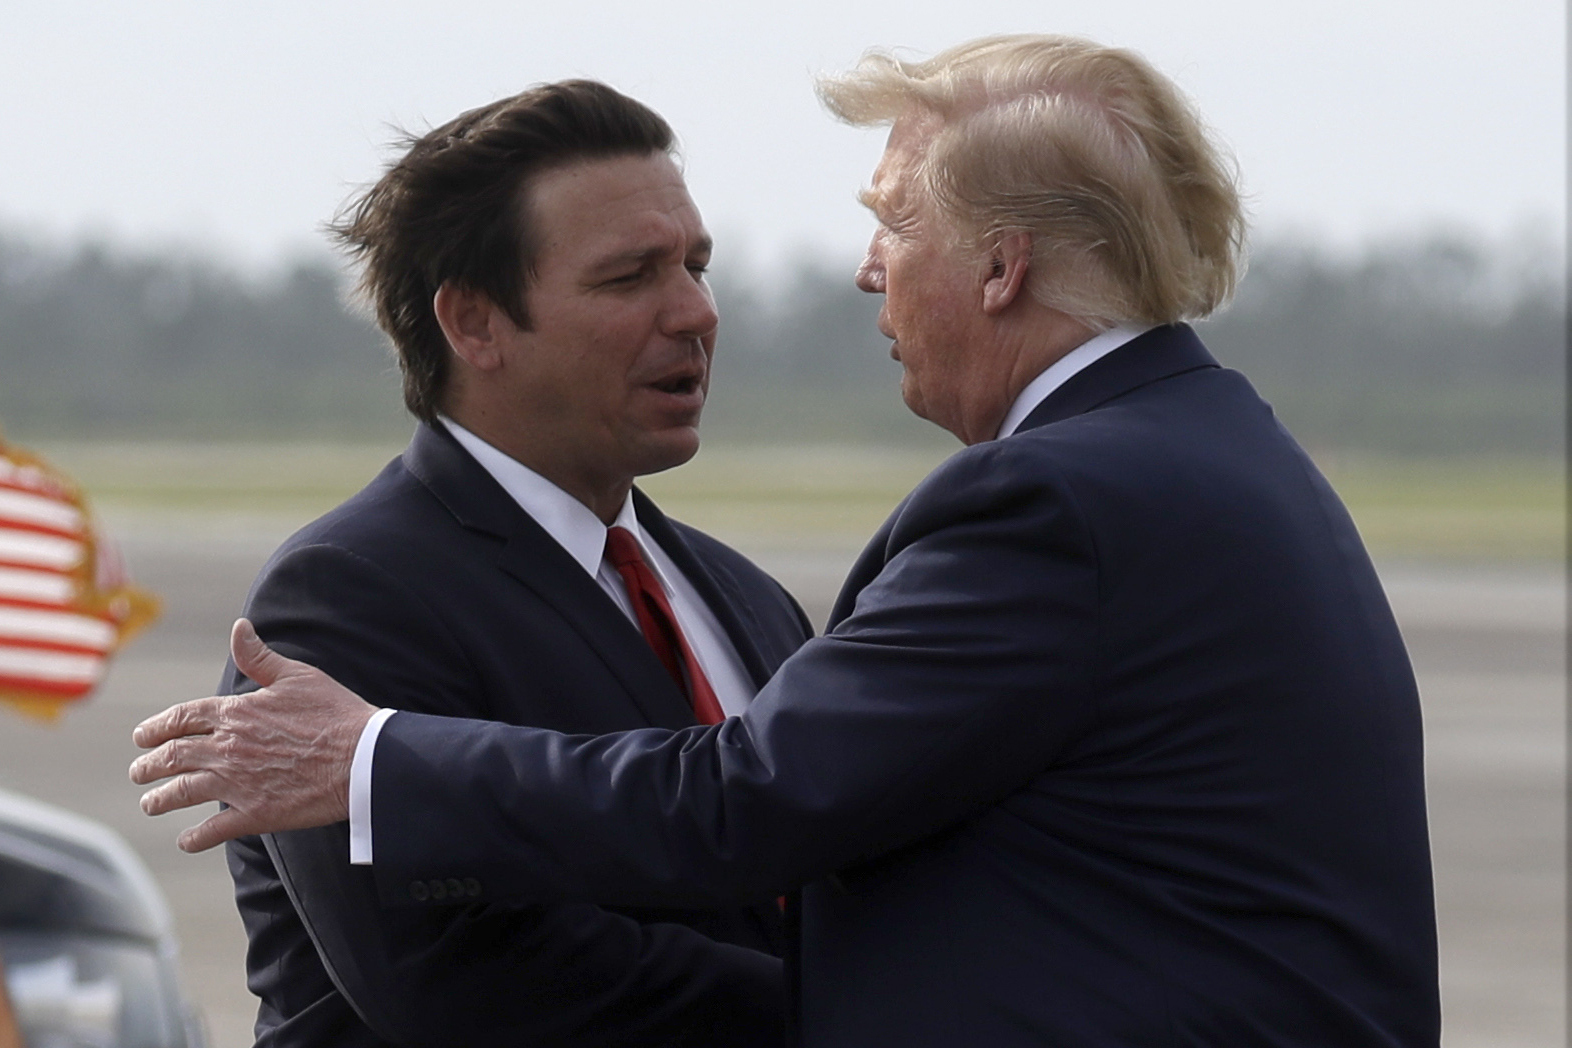 DeSantis Gets Glowing Praise from Trump Months After Saying, ‘If You Kiss the Ring, He’ll Say You’re Wonderful’